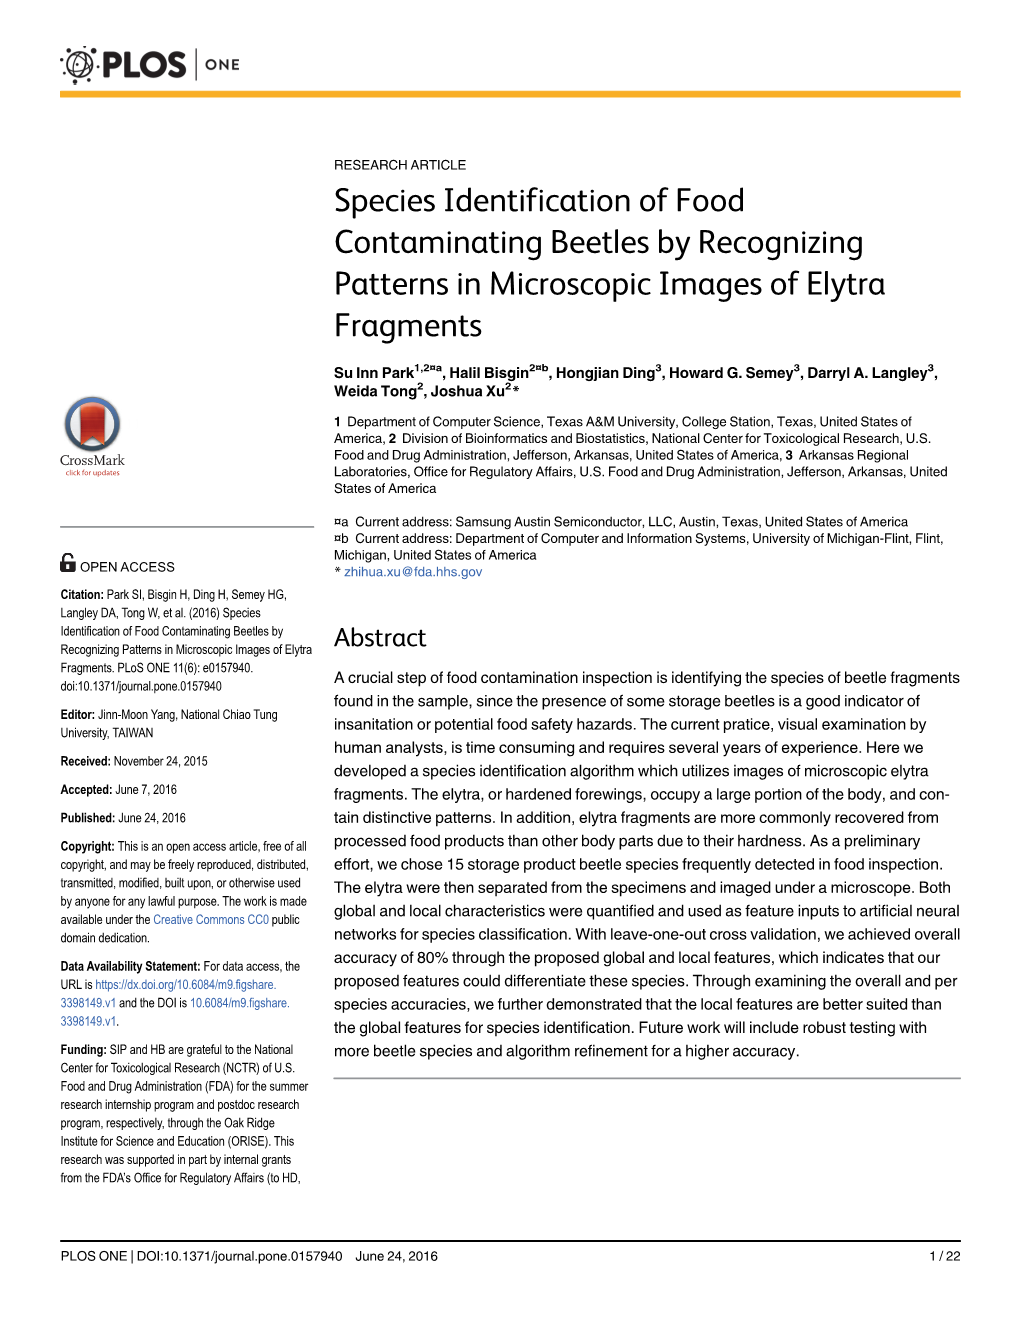 Species Identification of Food Contaminating Beetles by Recognizing Patterns in Microscopic Images of Elytra Fragments